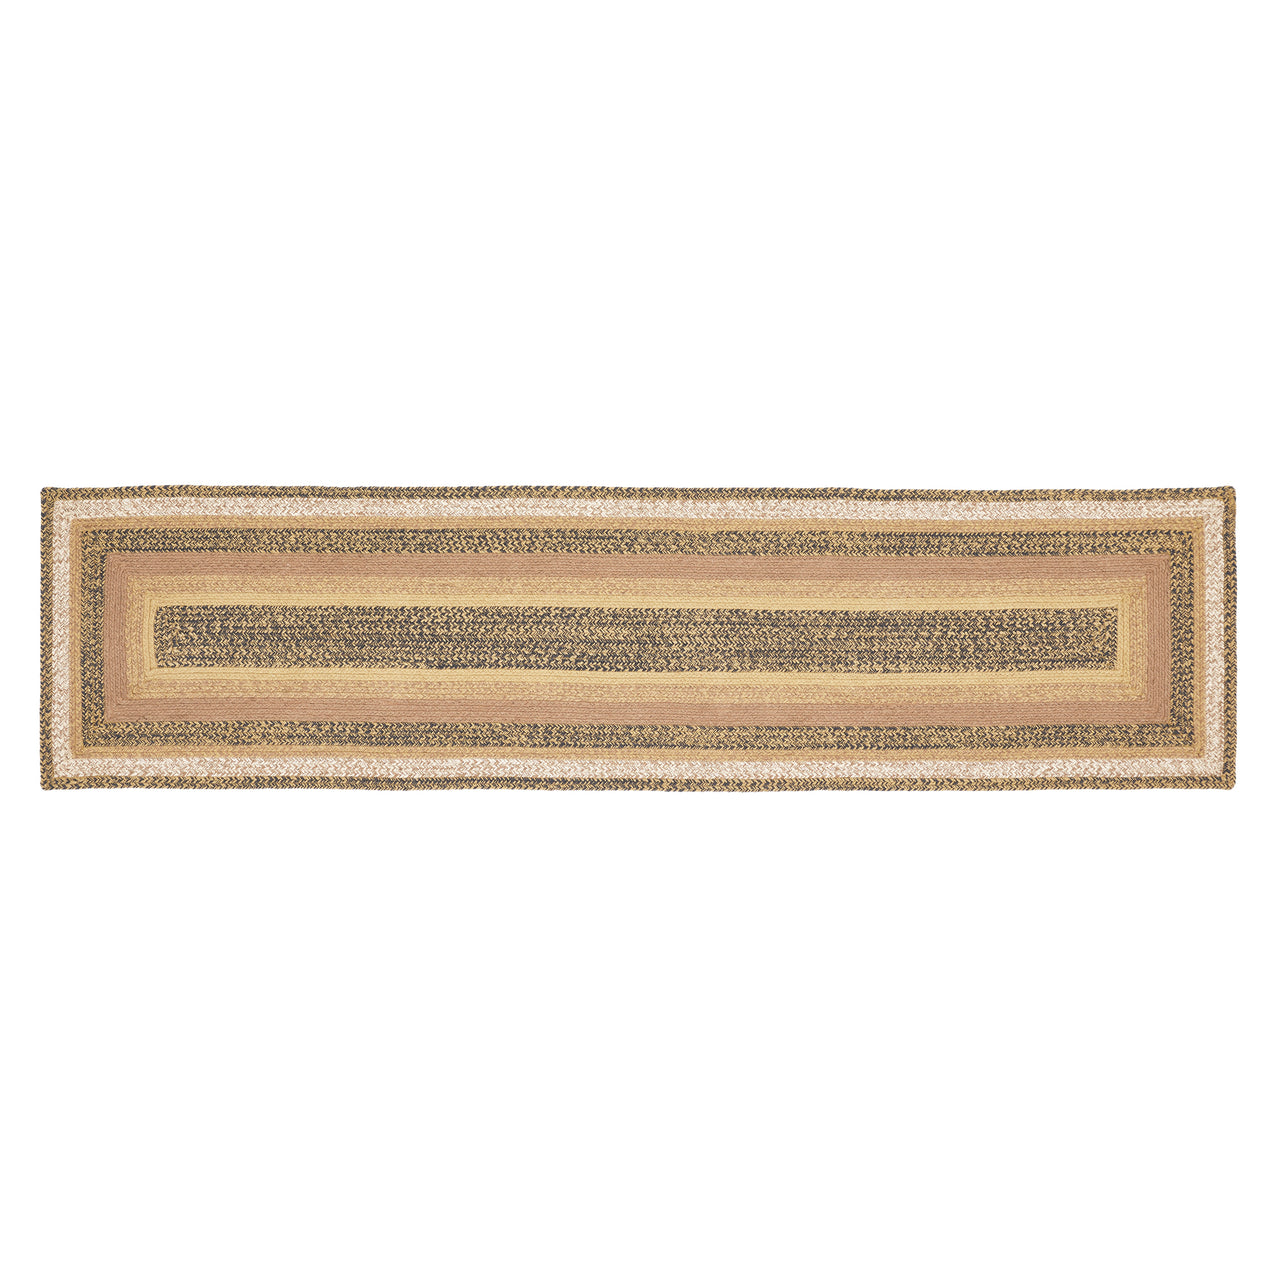 Kettle Grove Jute Braided Rug/Runner Rect. with Rug Pad 2'x8' VHC Brands